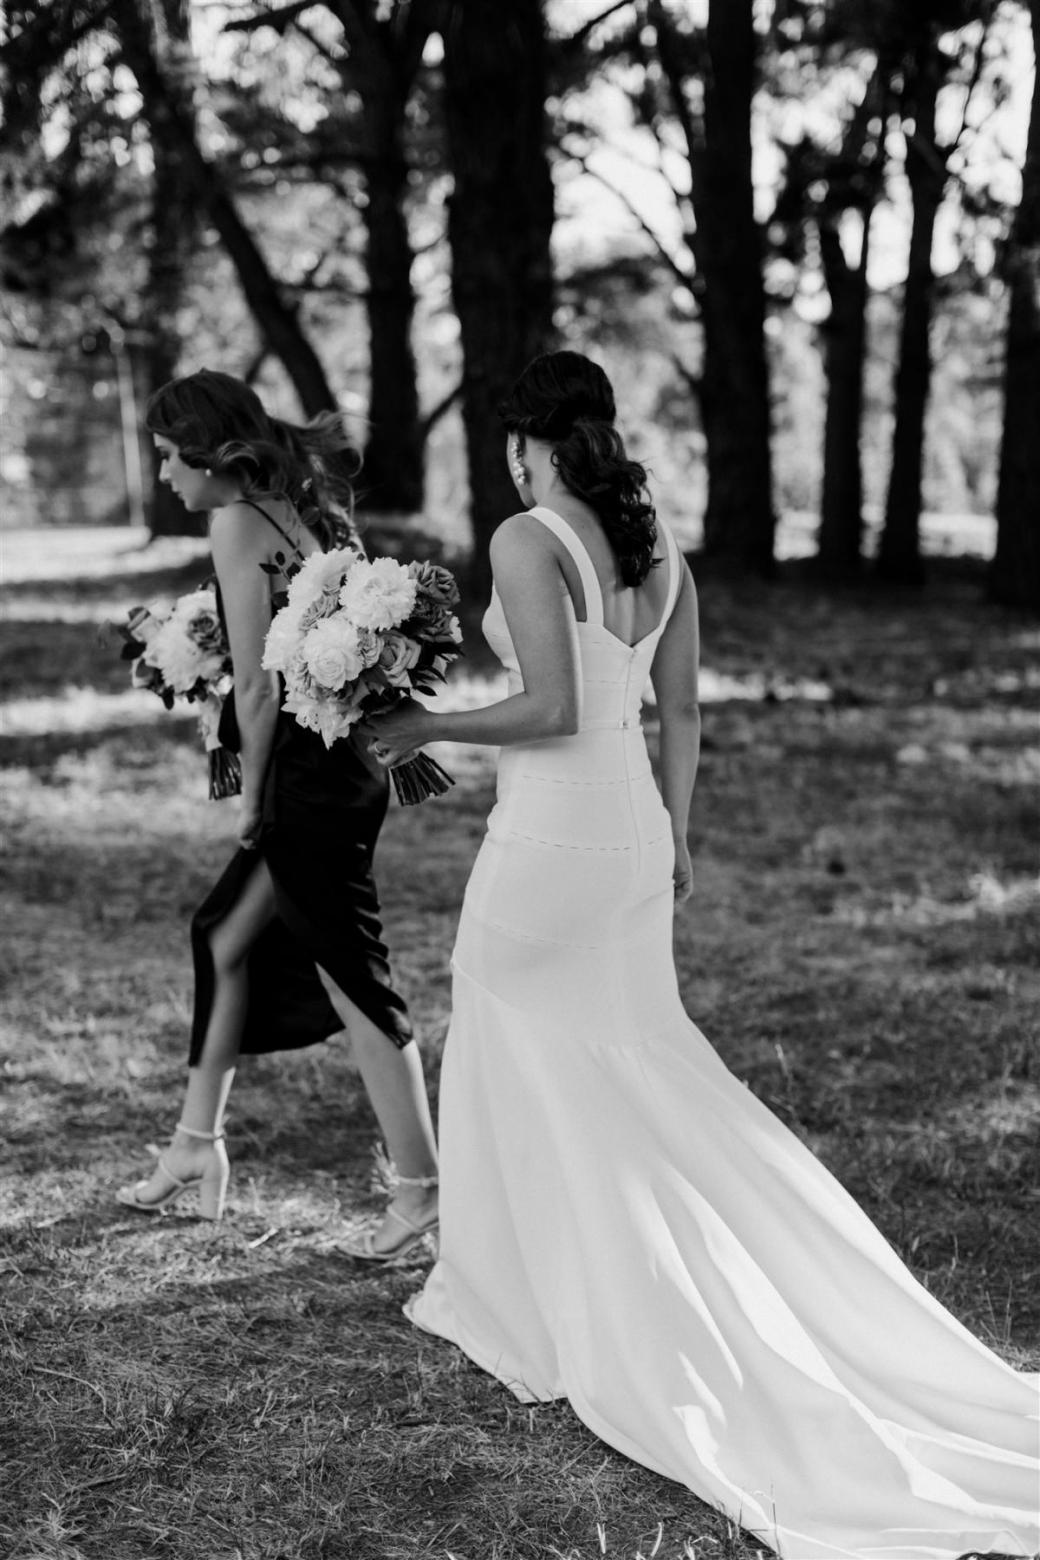 KWH real bride Rachael walking with a timeless bouquet. Rachael wears our minimalistic Violet gown.